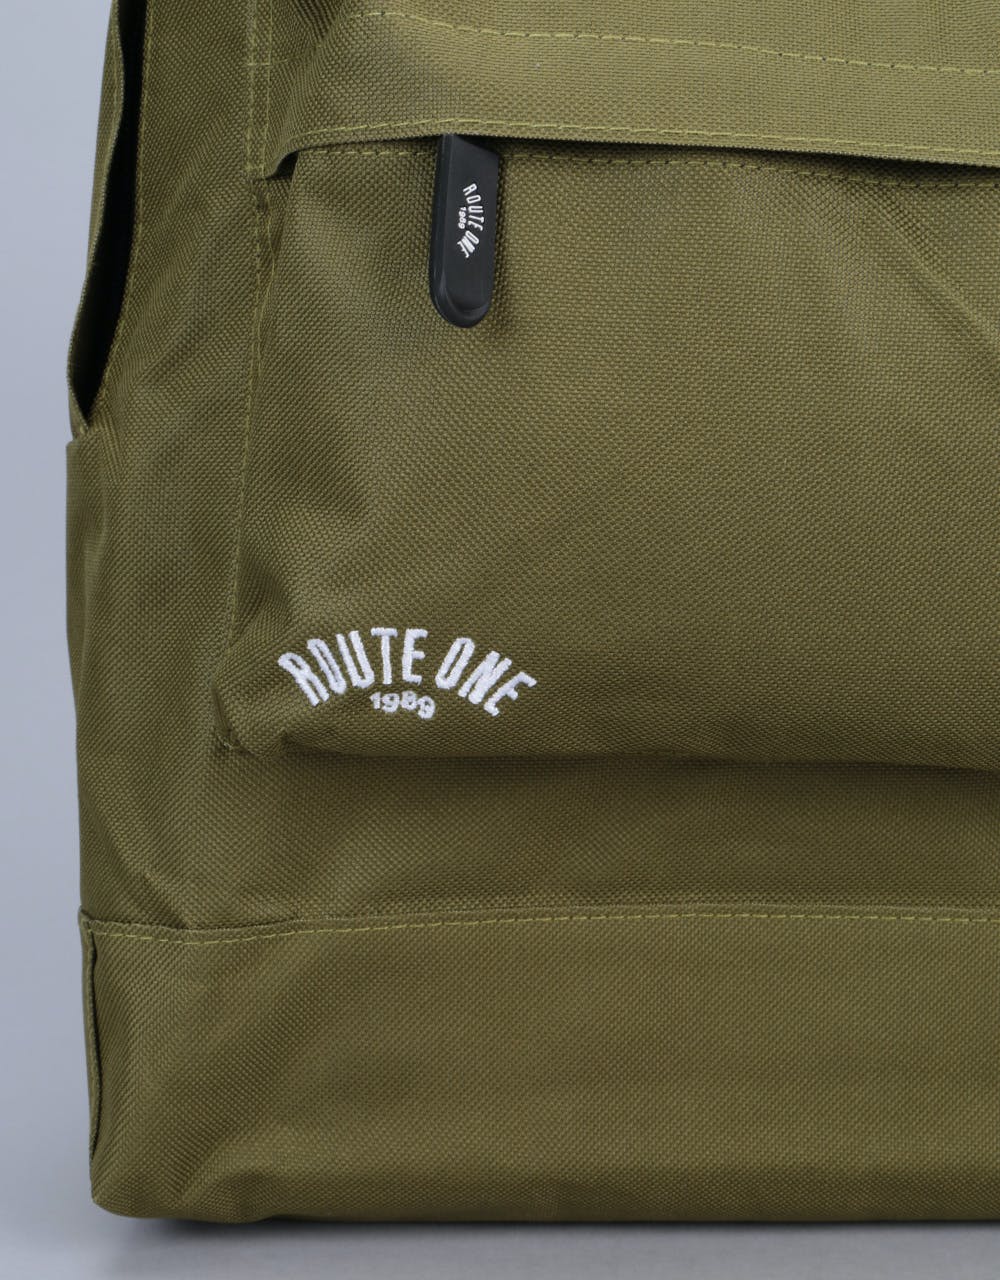 Route One Backpack - Olive